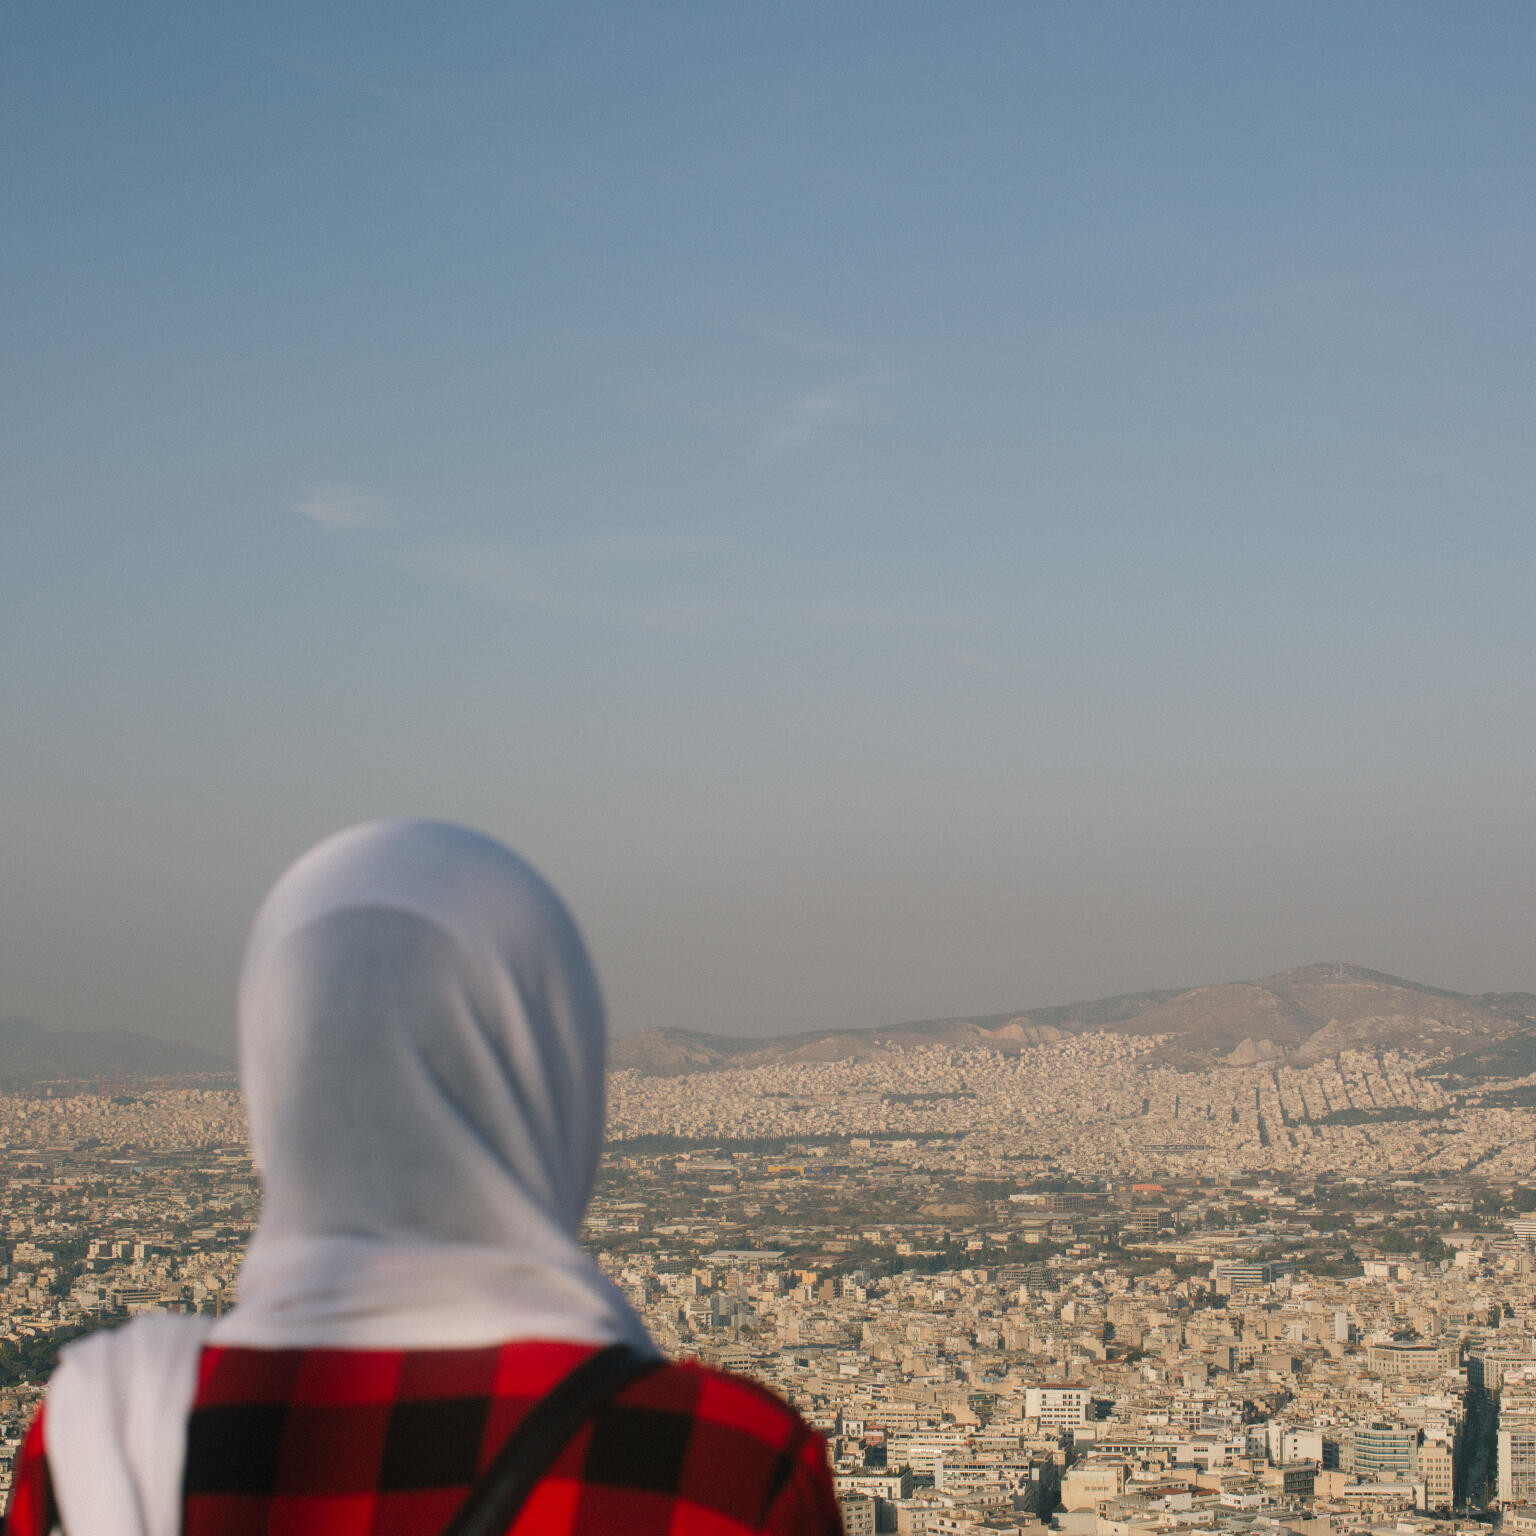 Fariba stands with her back to the camera and overlooks the city of Athens, Greece.